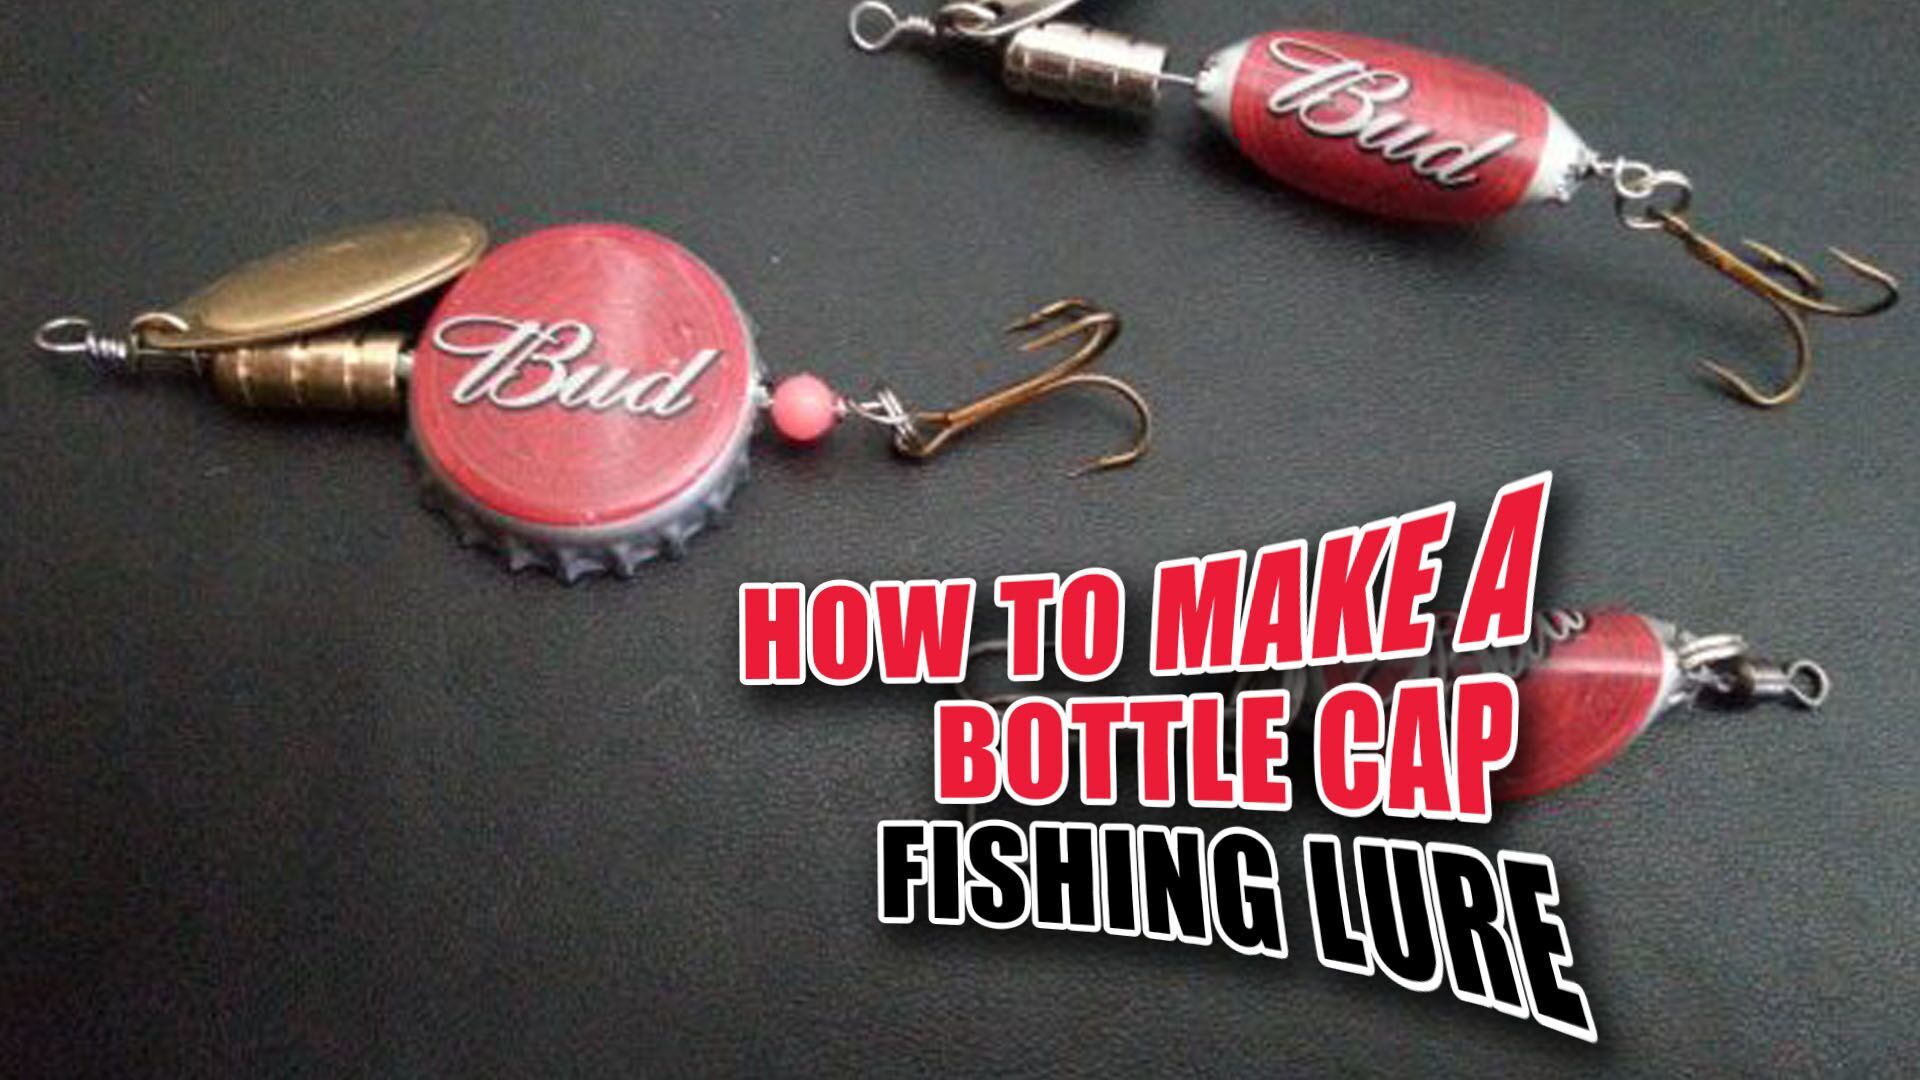 How to Make a Bottle Cap Fishing Lure